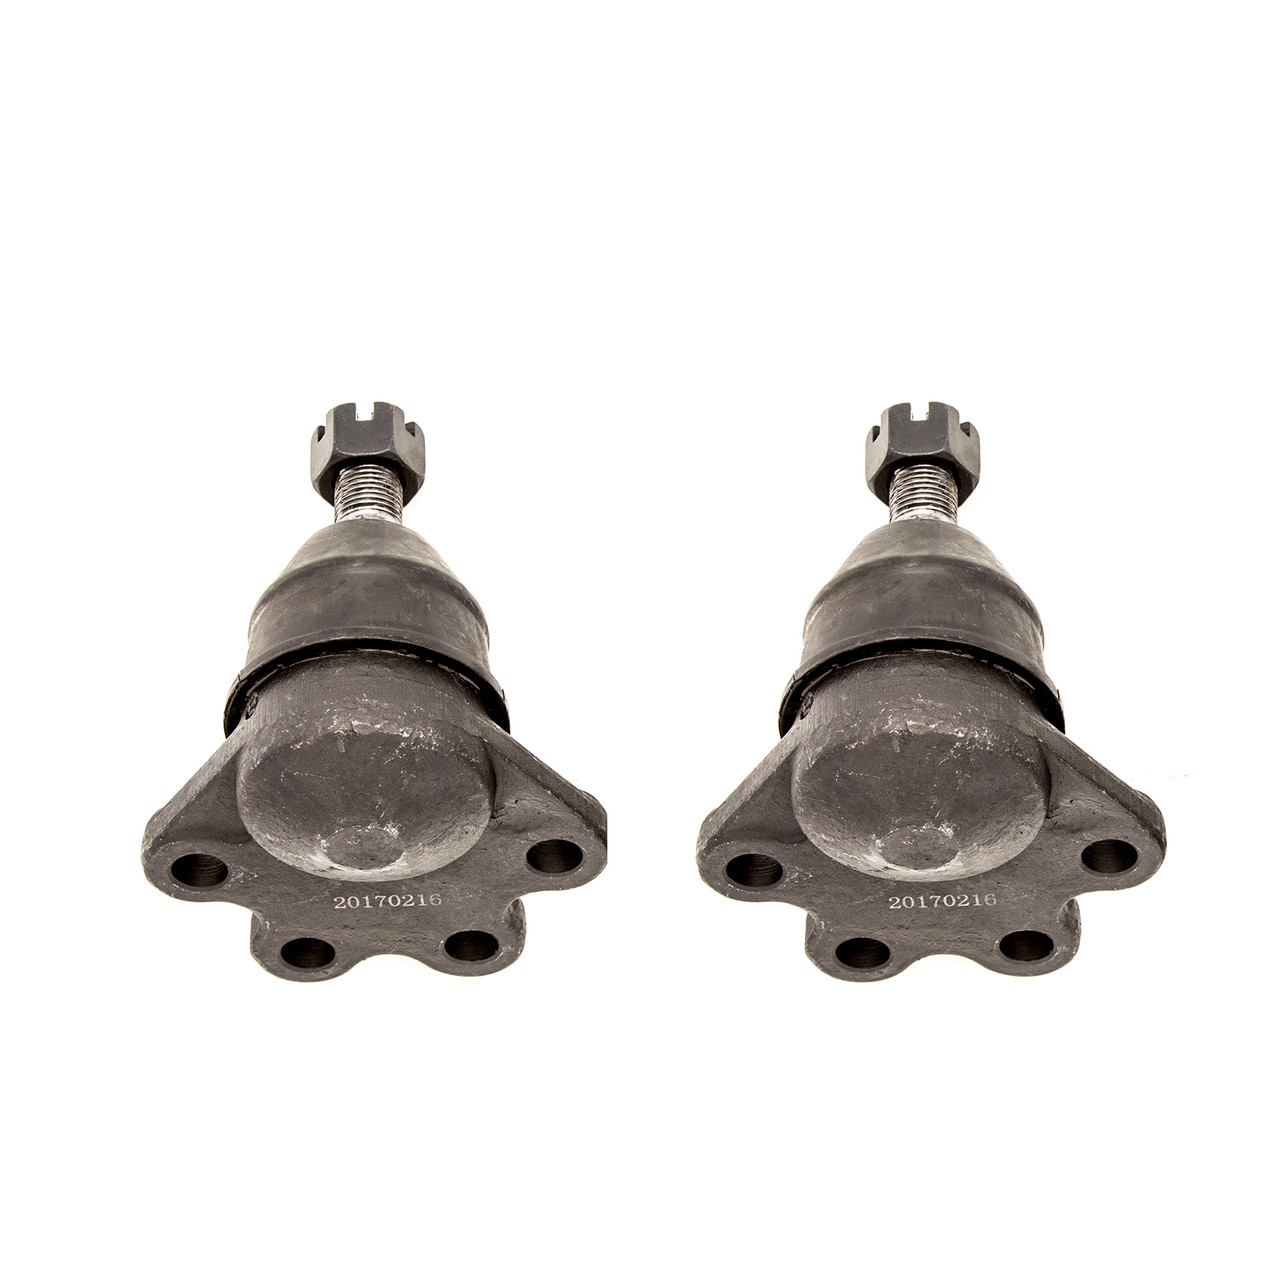 1992-1994 GMC 4WD K2500 Suburban New Upper and Lower Ball Joints Set